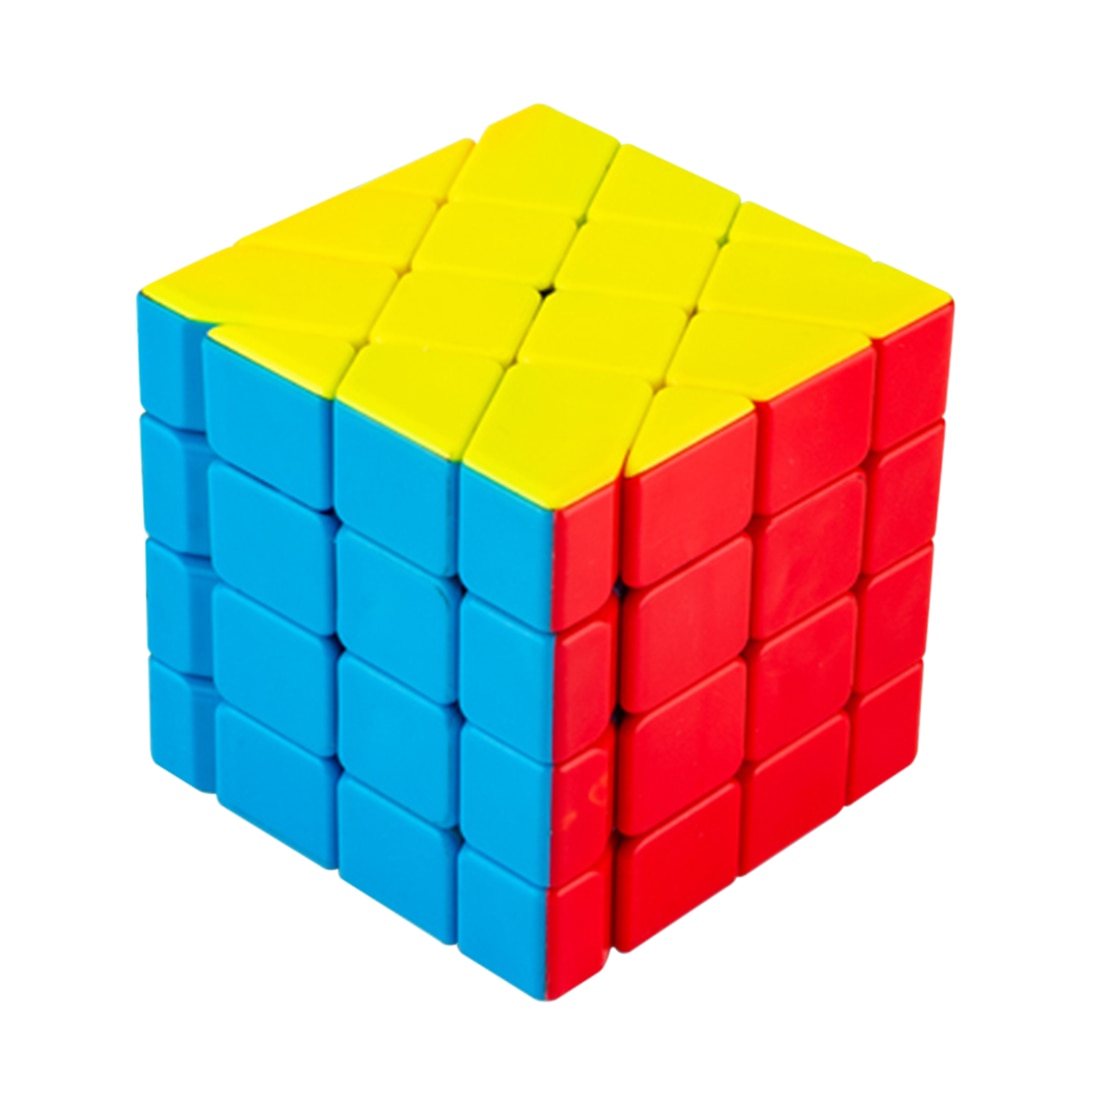 Fanxin Magic Cube 4x4x4 Transfer Puzzle Cube Intelligent Toys for Competition Challenge - Colorful